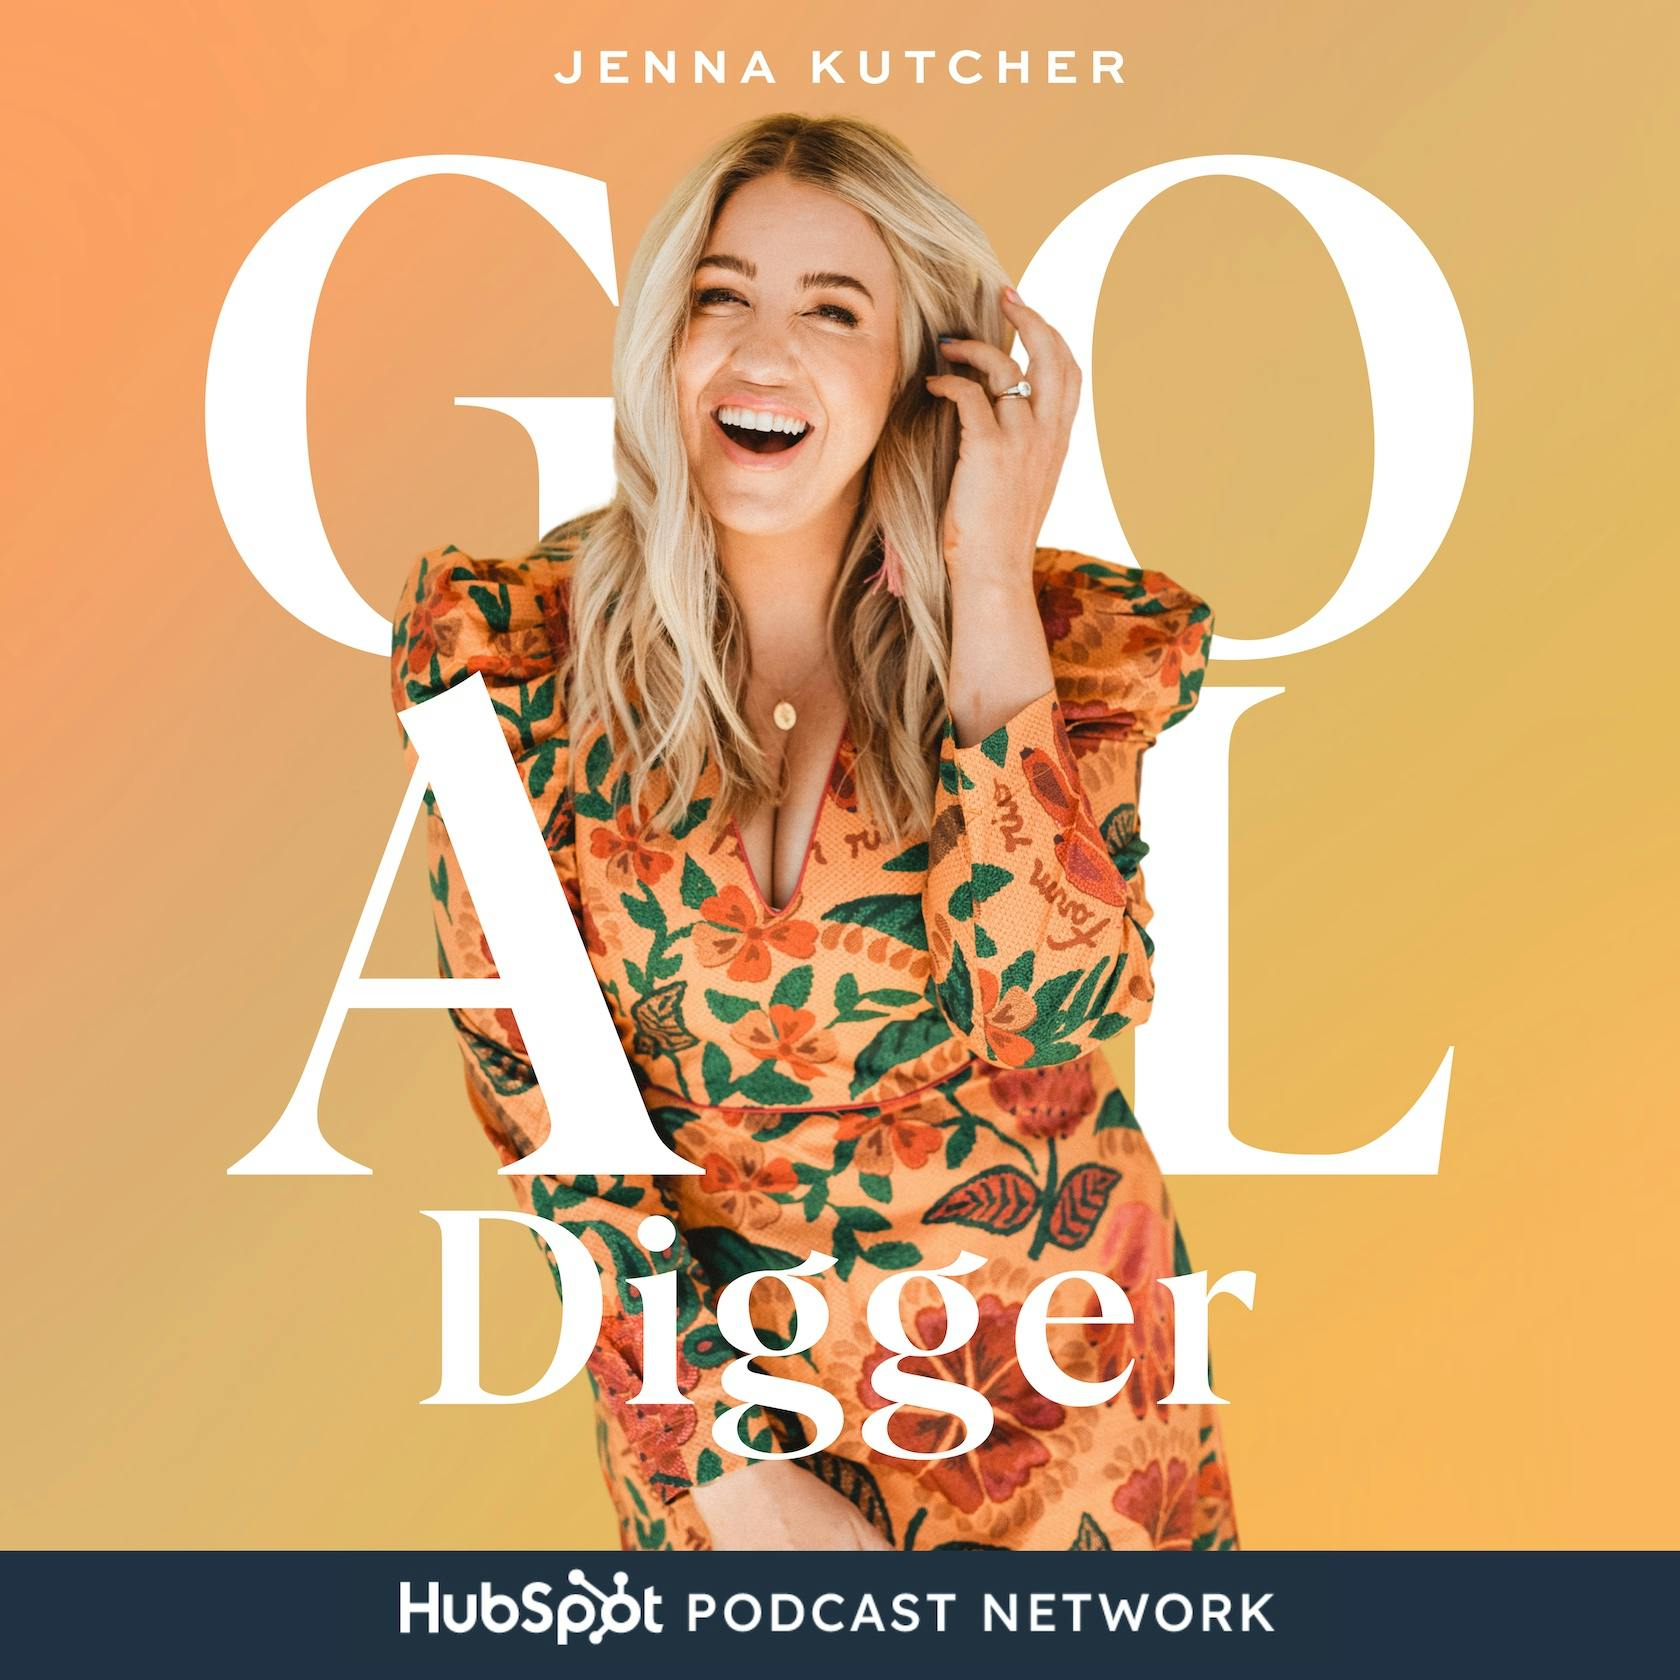 The Goal Digger Podcast podcast show image